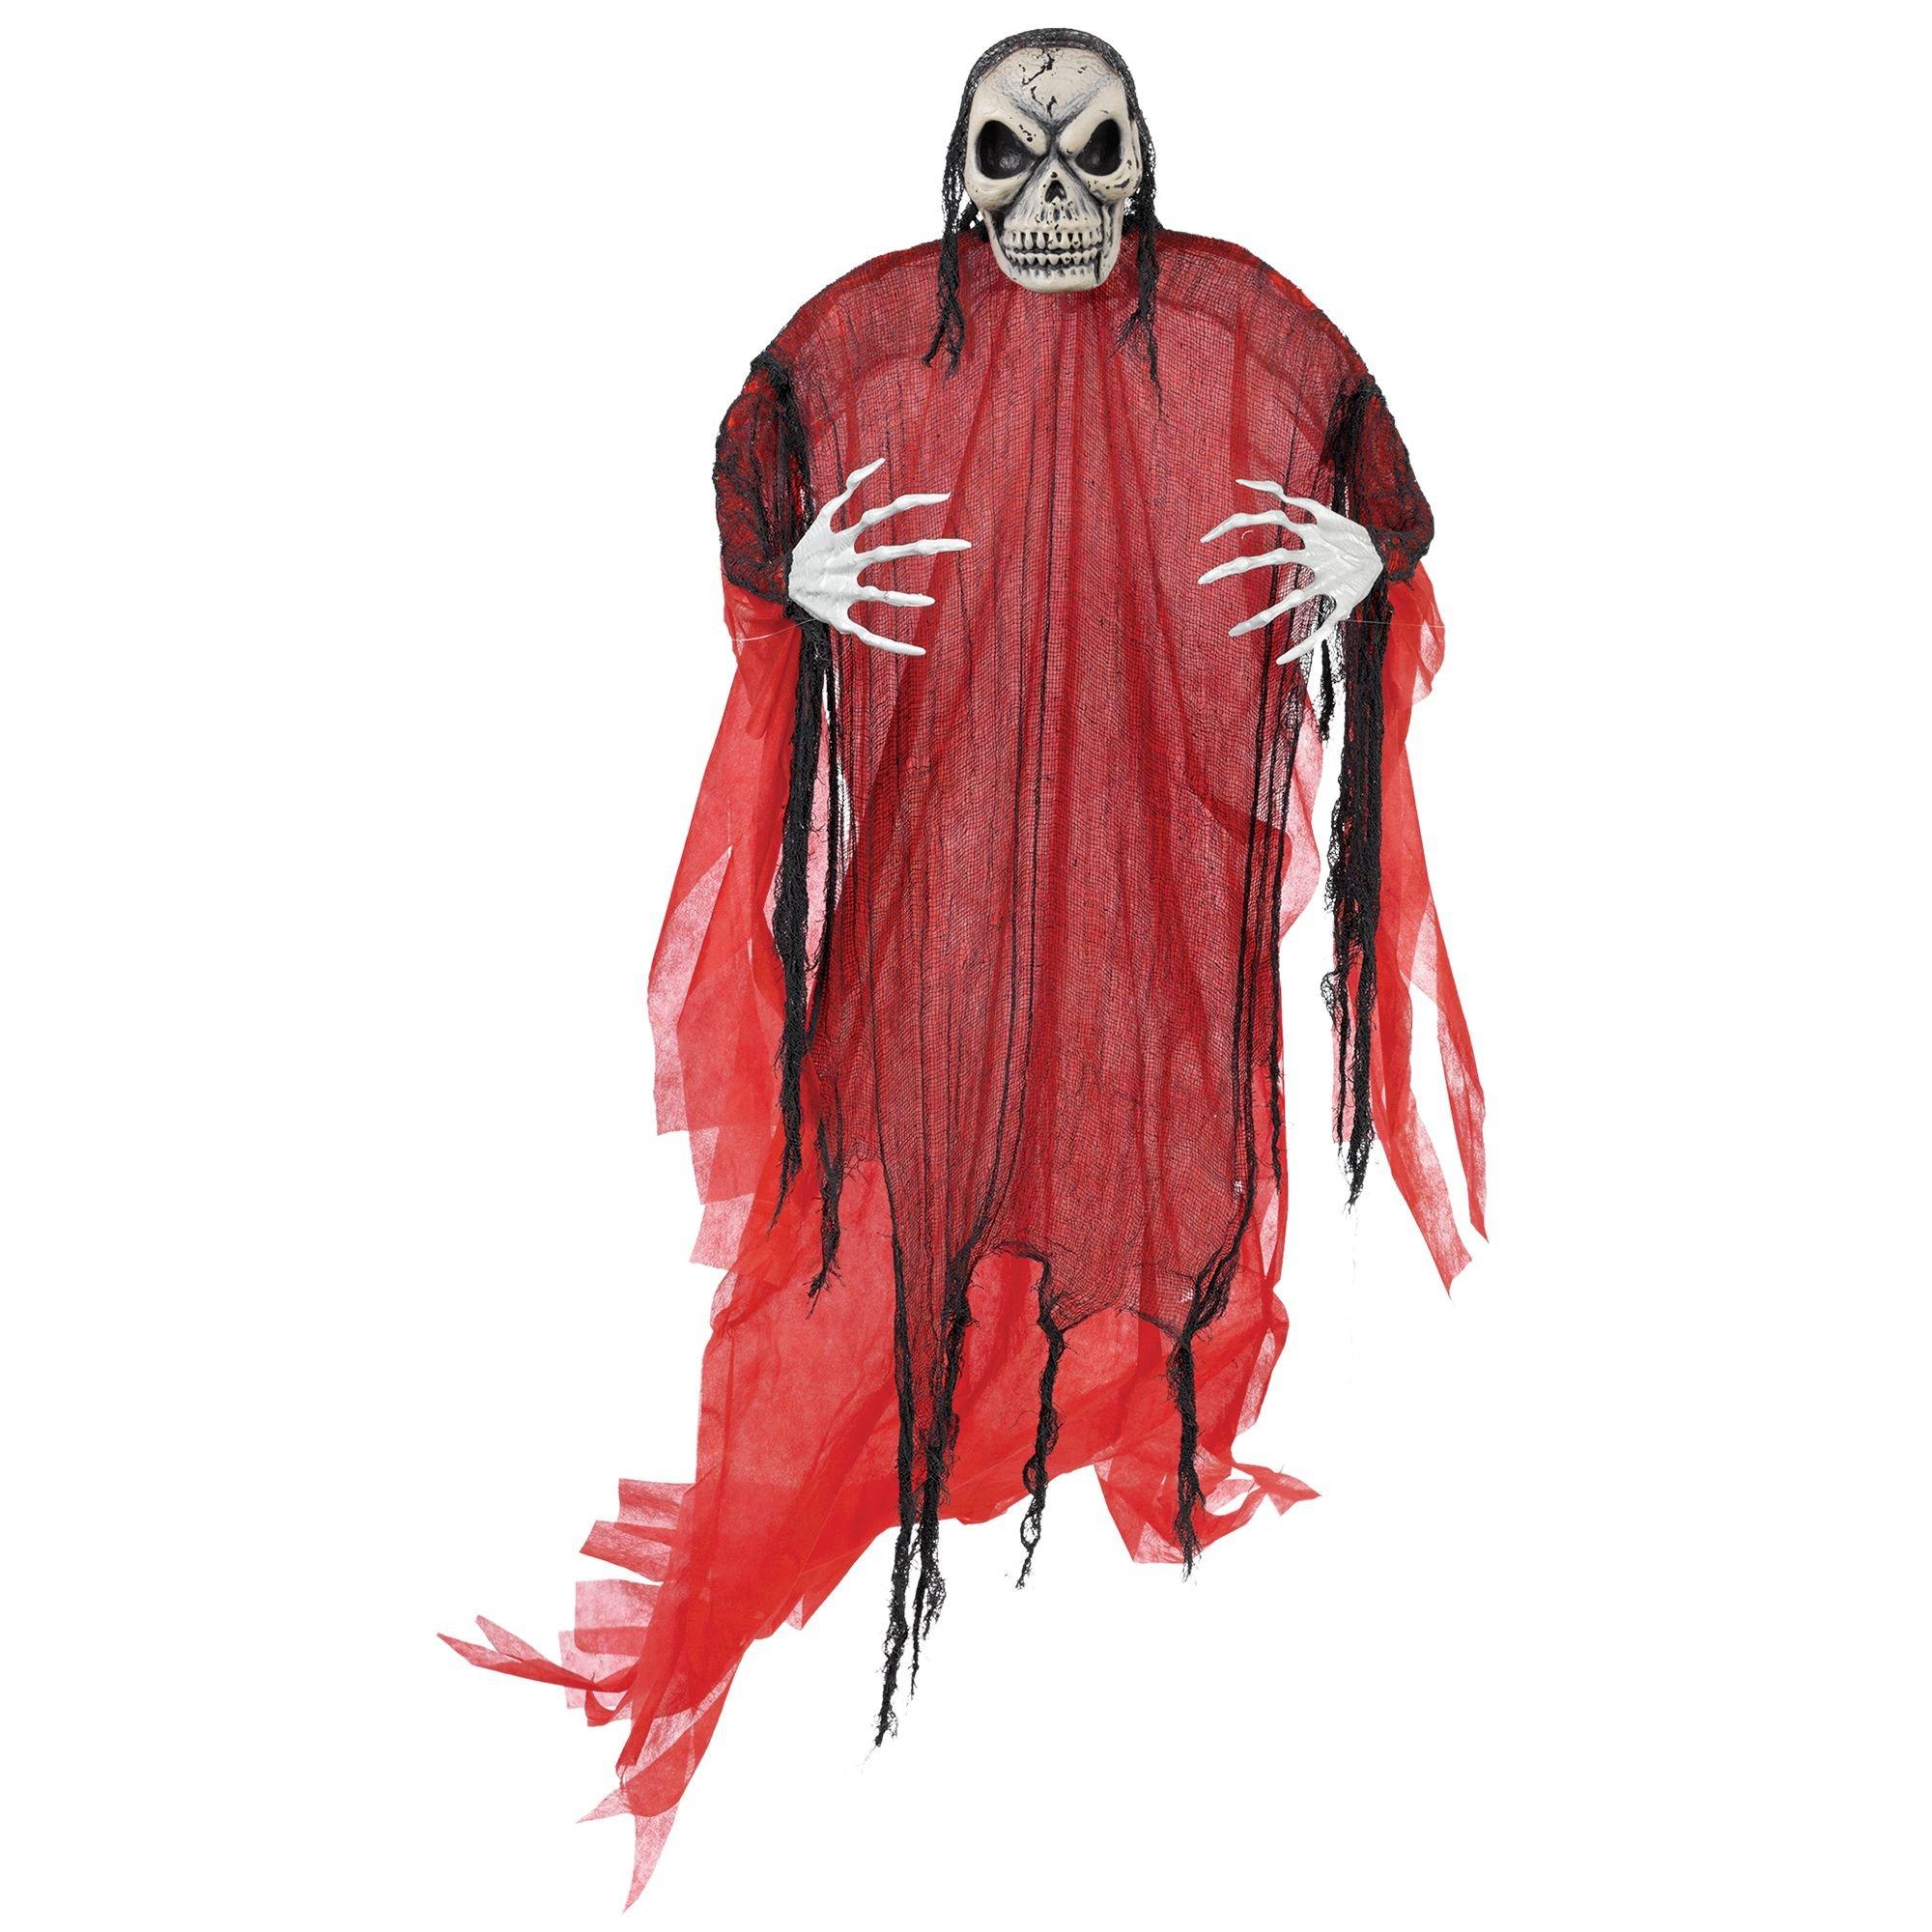 Giant Red Reaper Decoration 7ft | Party City